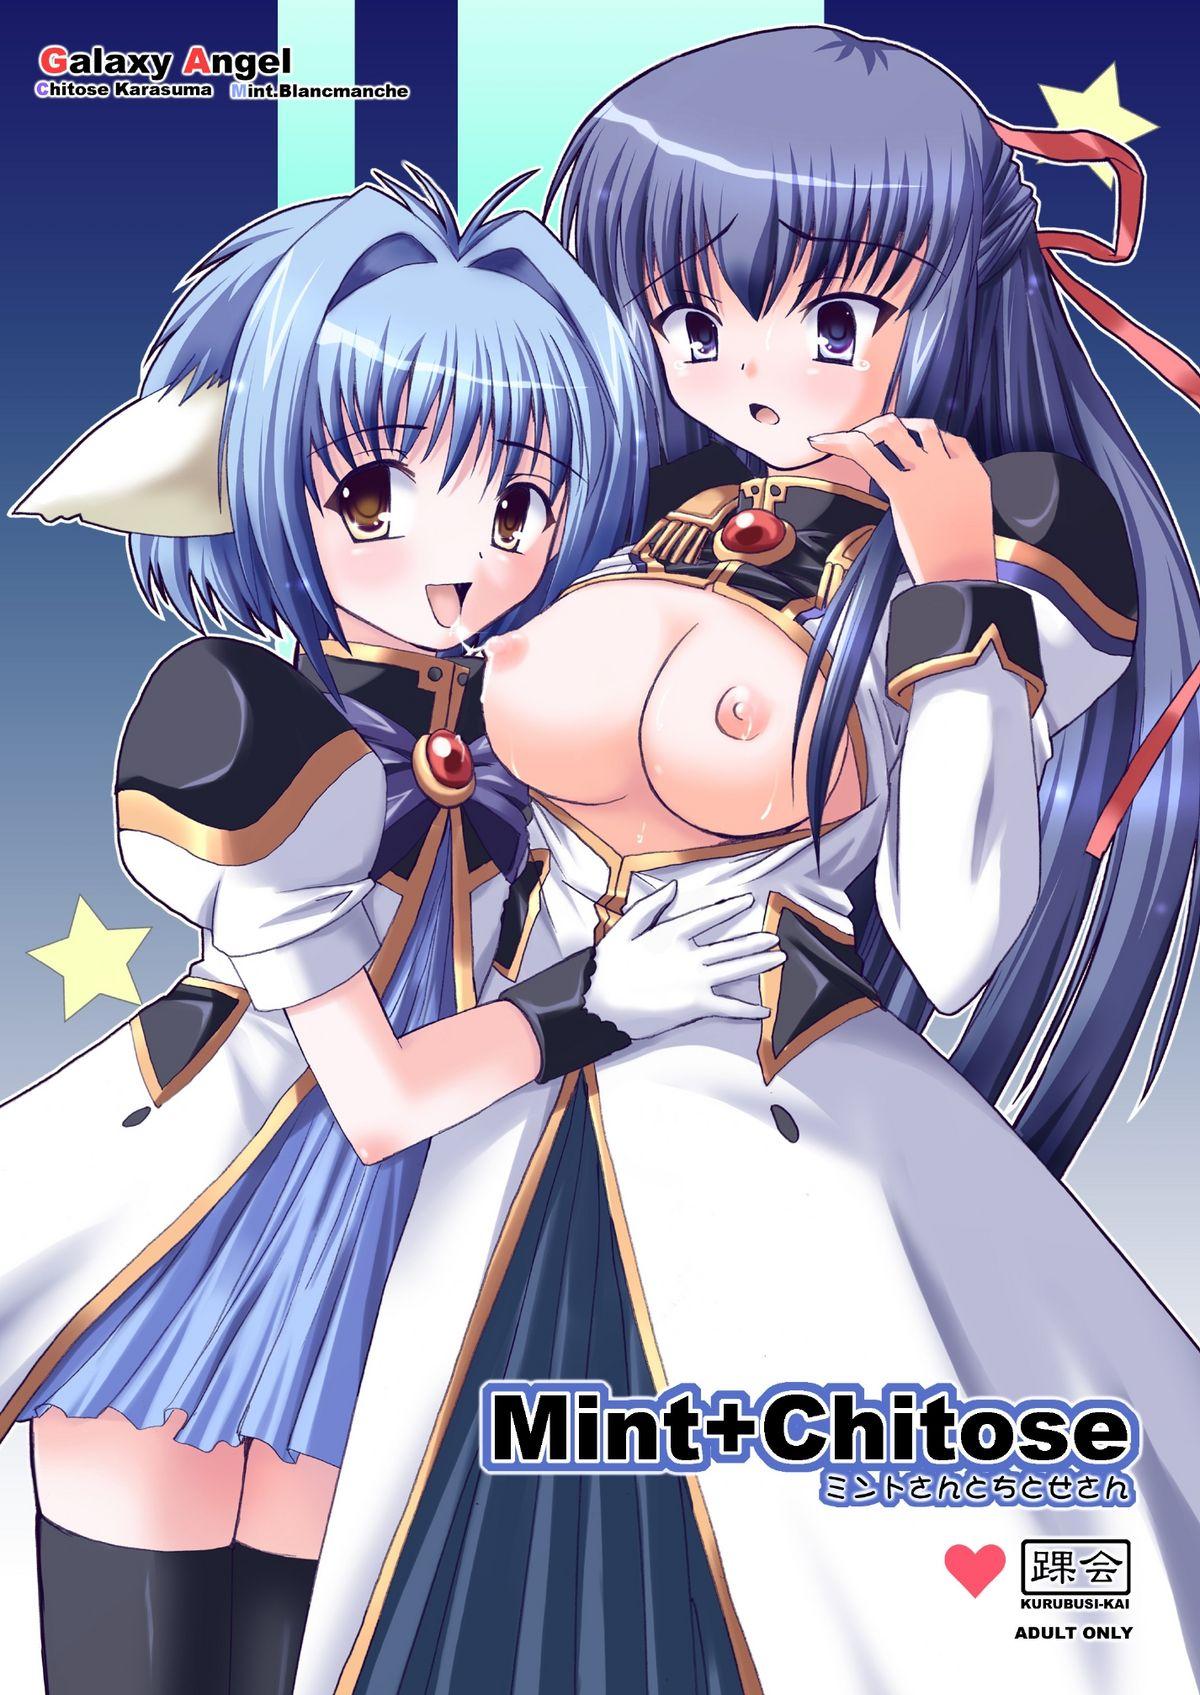 Gay Group Mint+Chitose - Galaxy angel Missionary Position Porn - Page 1